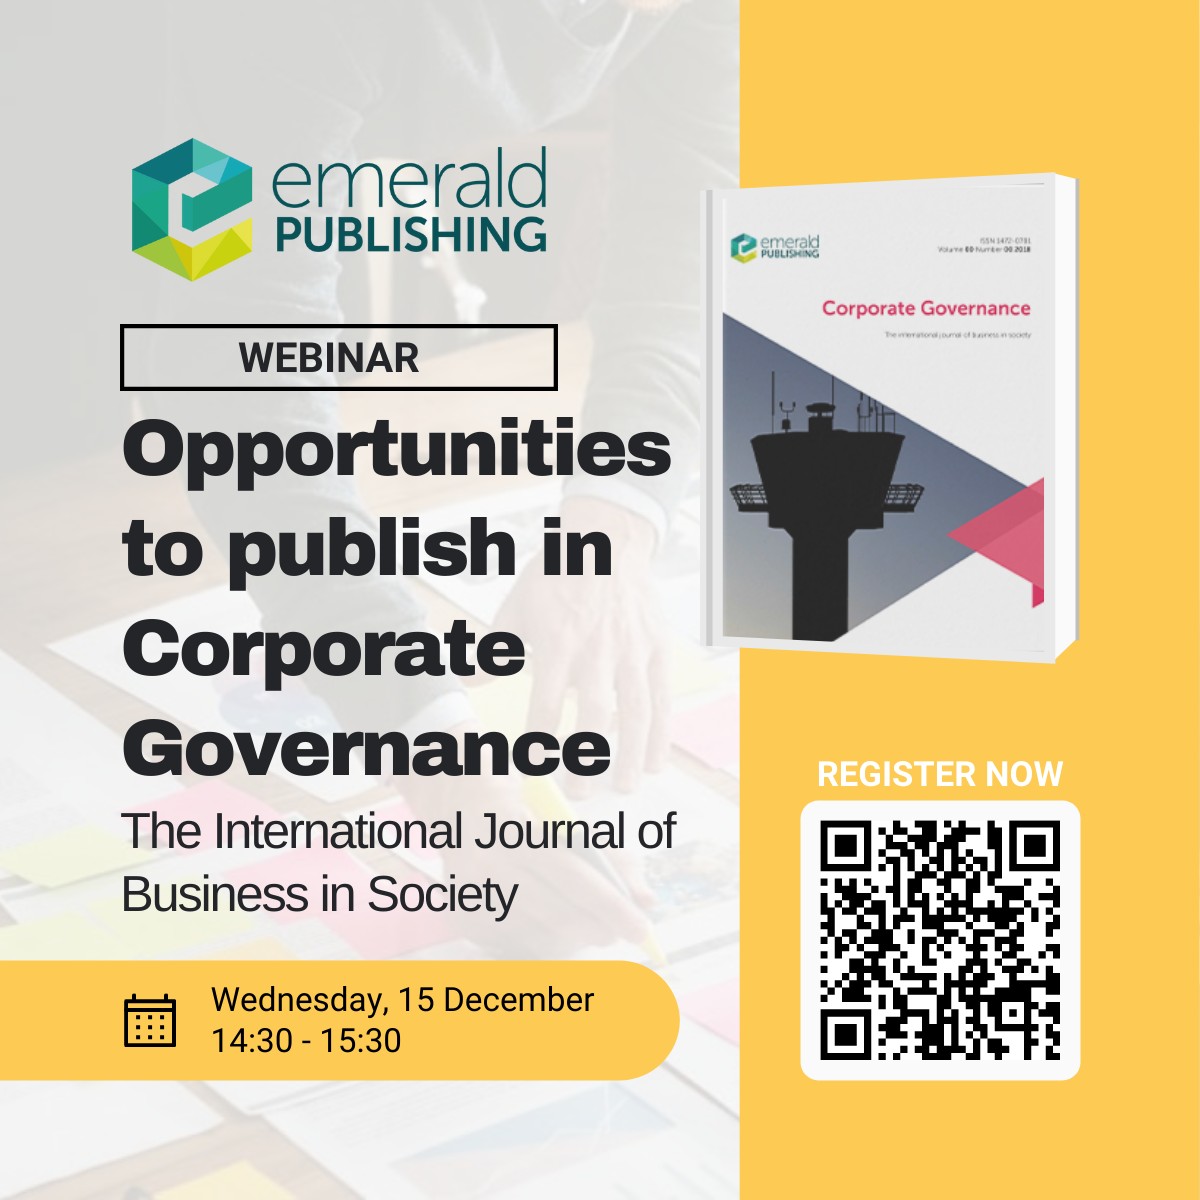 Emerald Webinar: Opportunities to publish in Corporate Governance: The International Journal of Business in Society